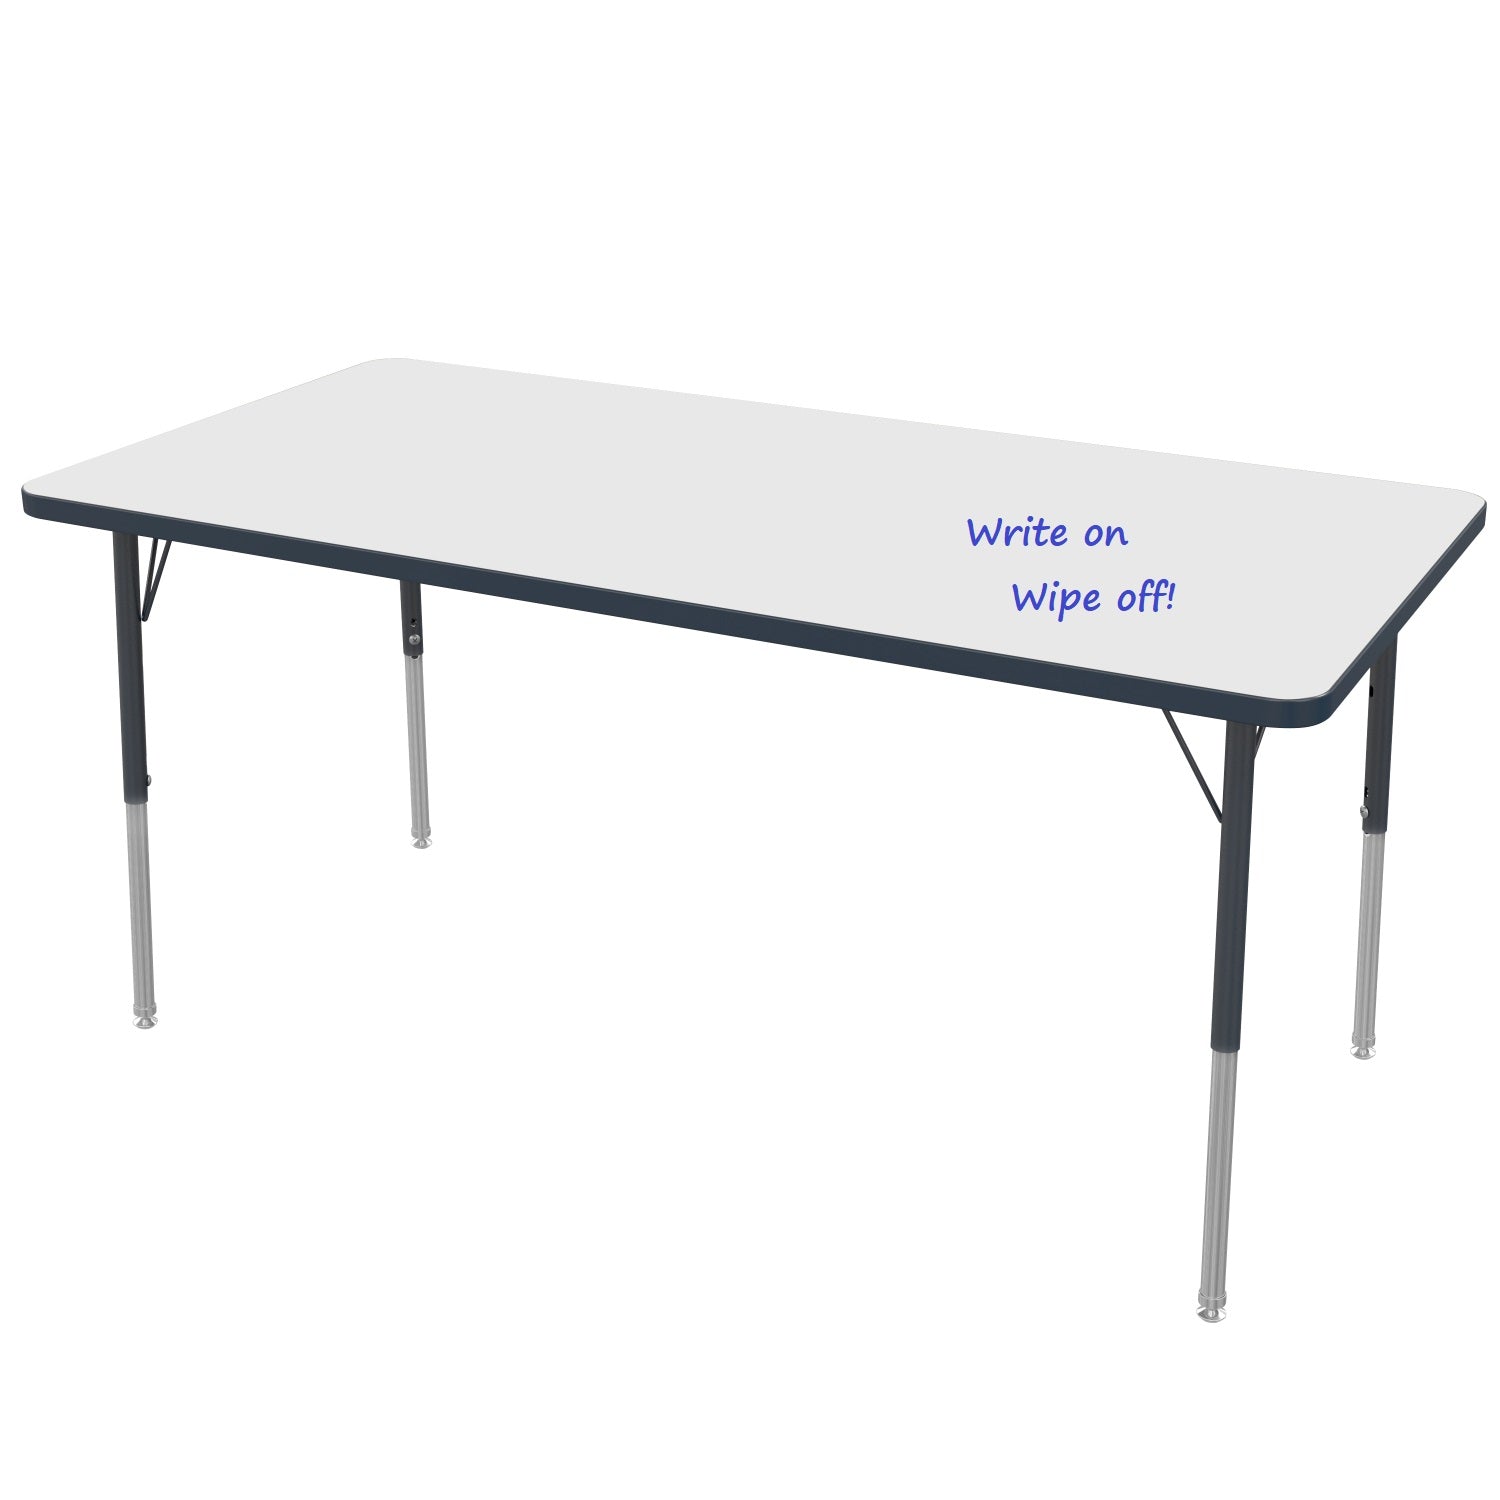 MG Series Adjustable Height Activity Table with White Dry Erase Markerboard Top, 30" x 60" Rectangle